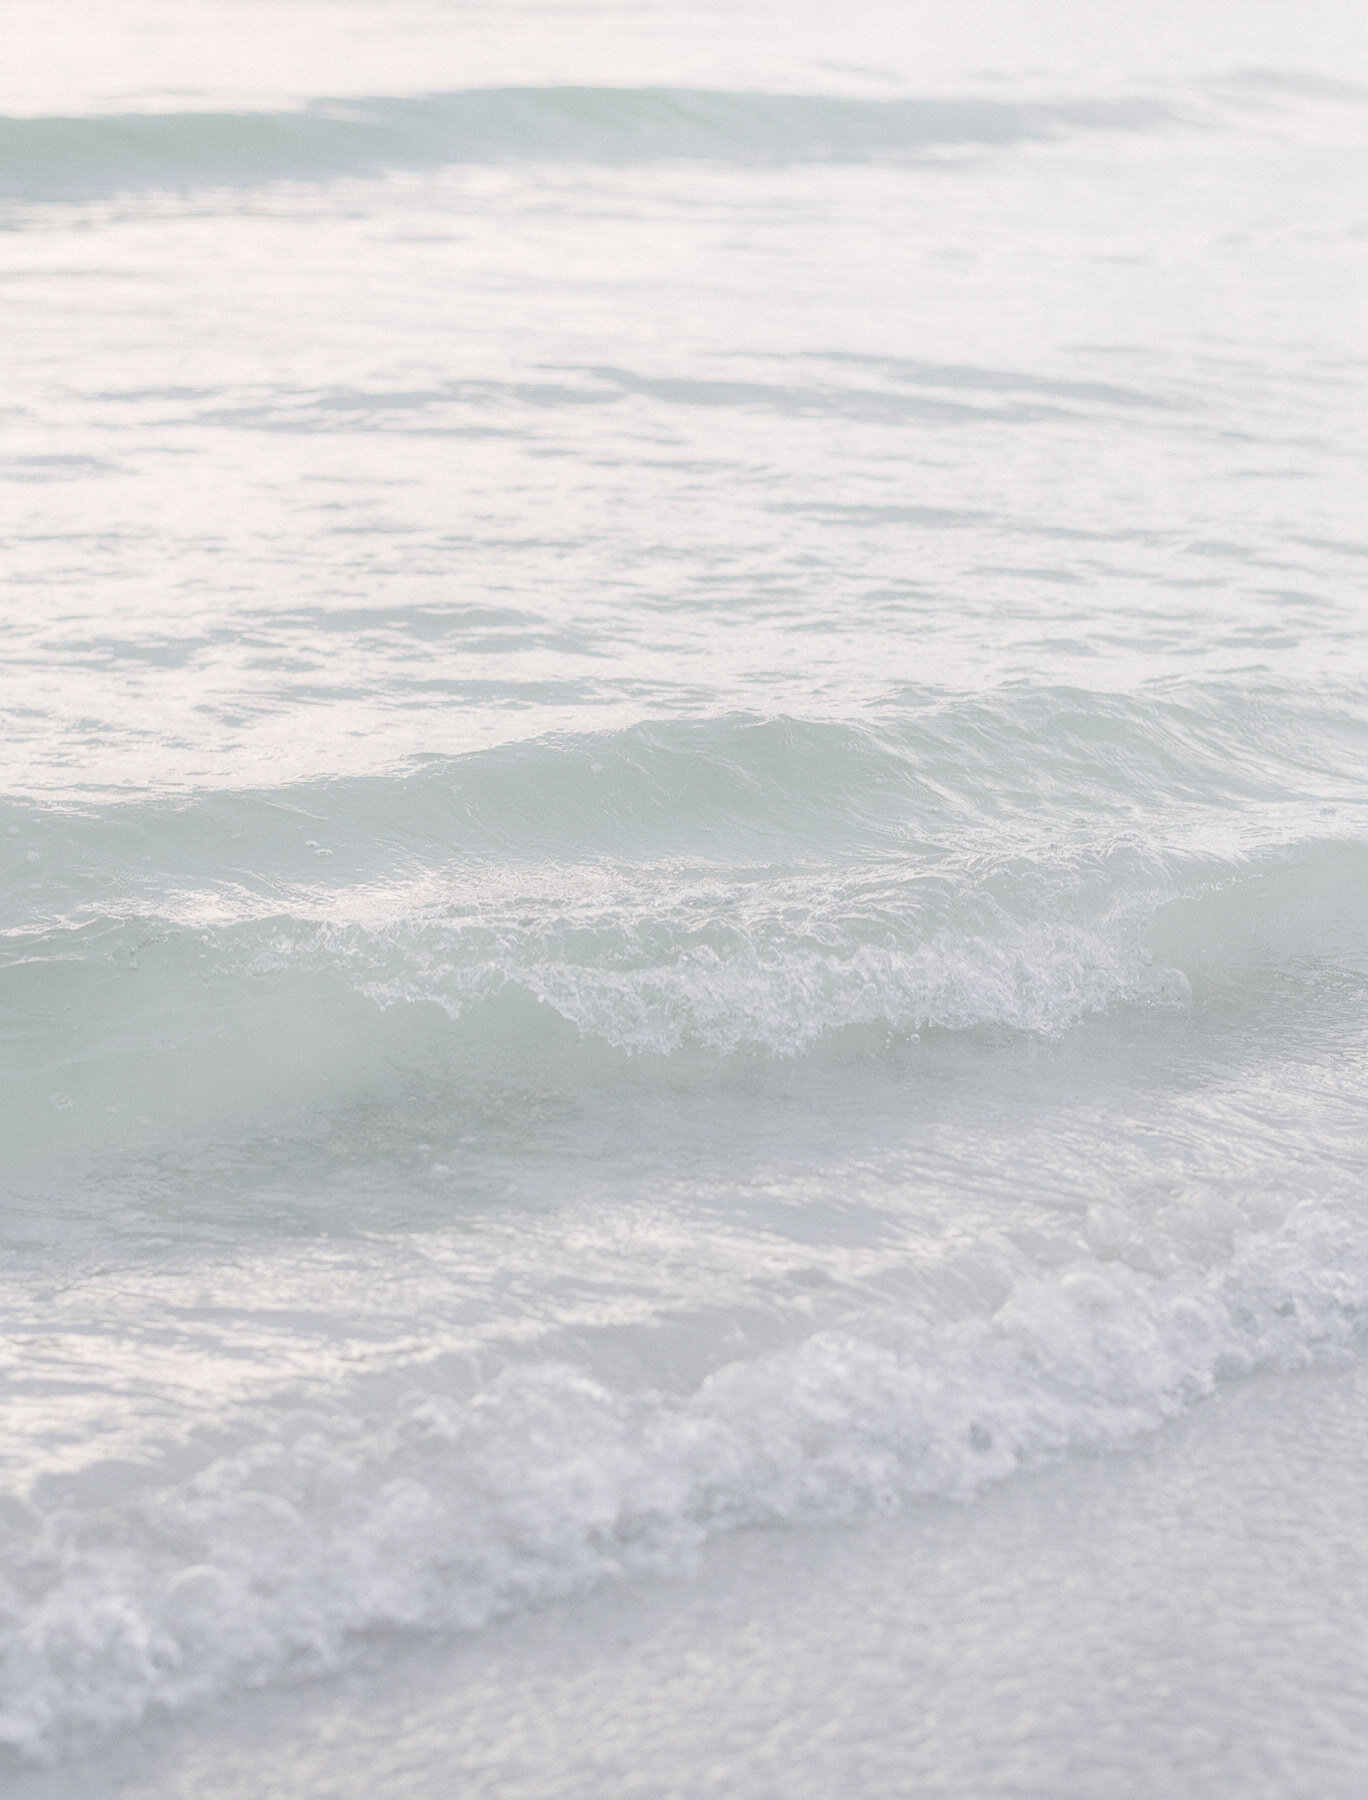 Private Florida Beach Engagement Session